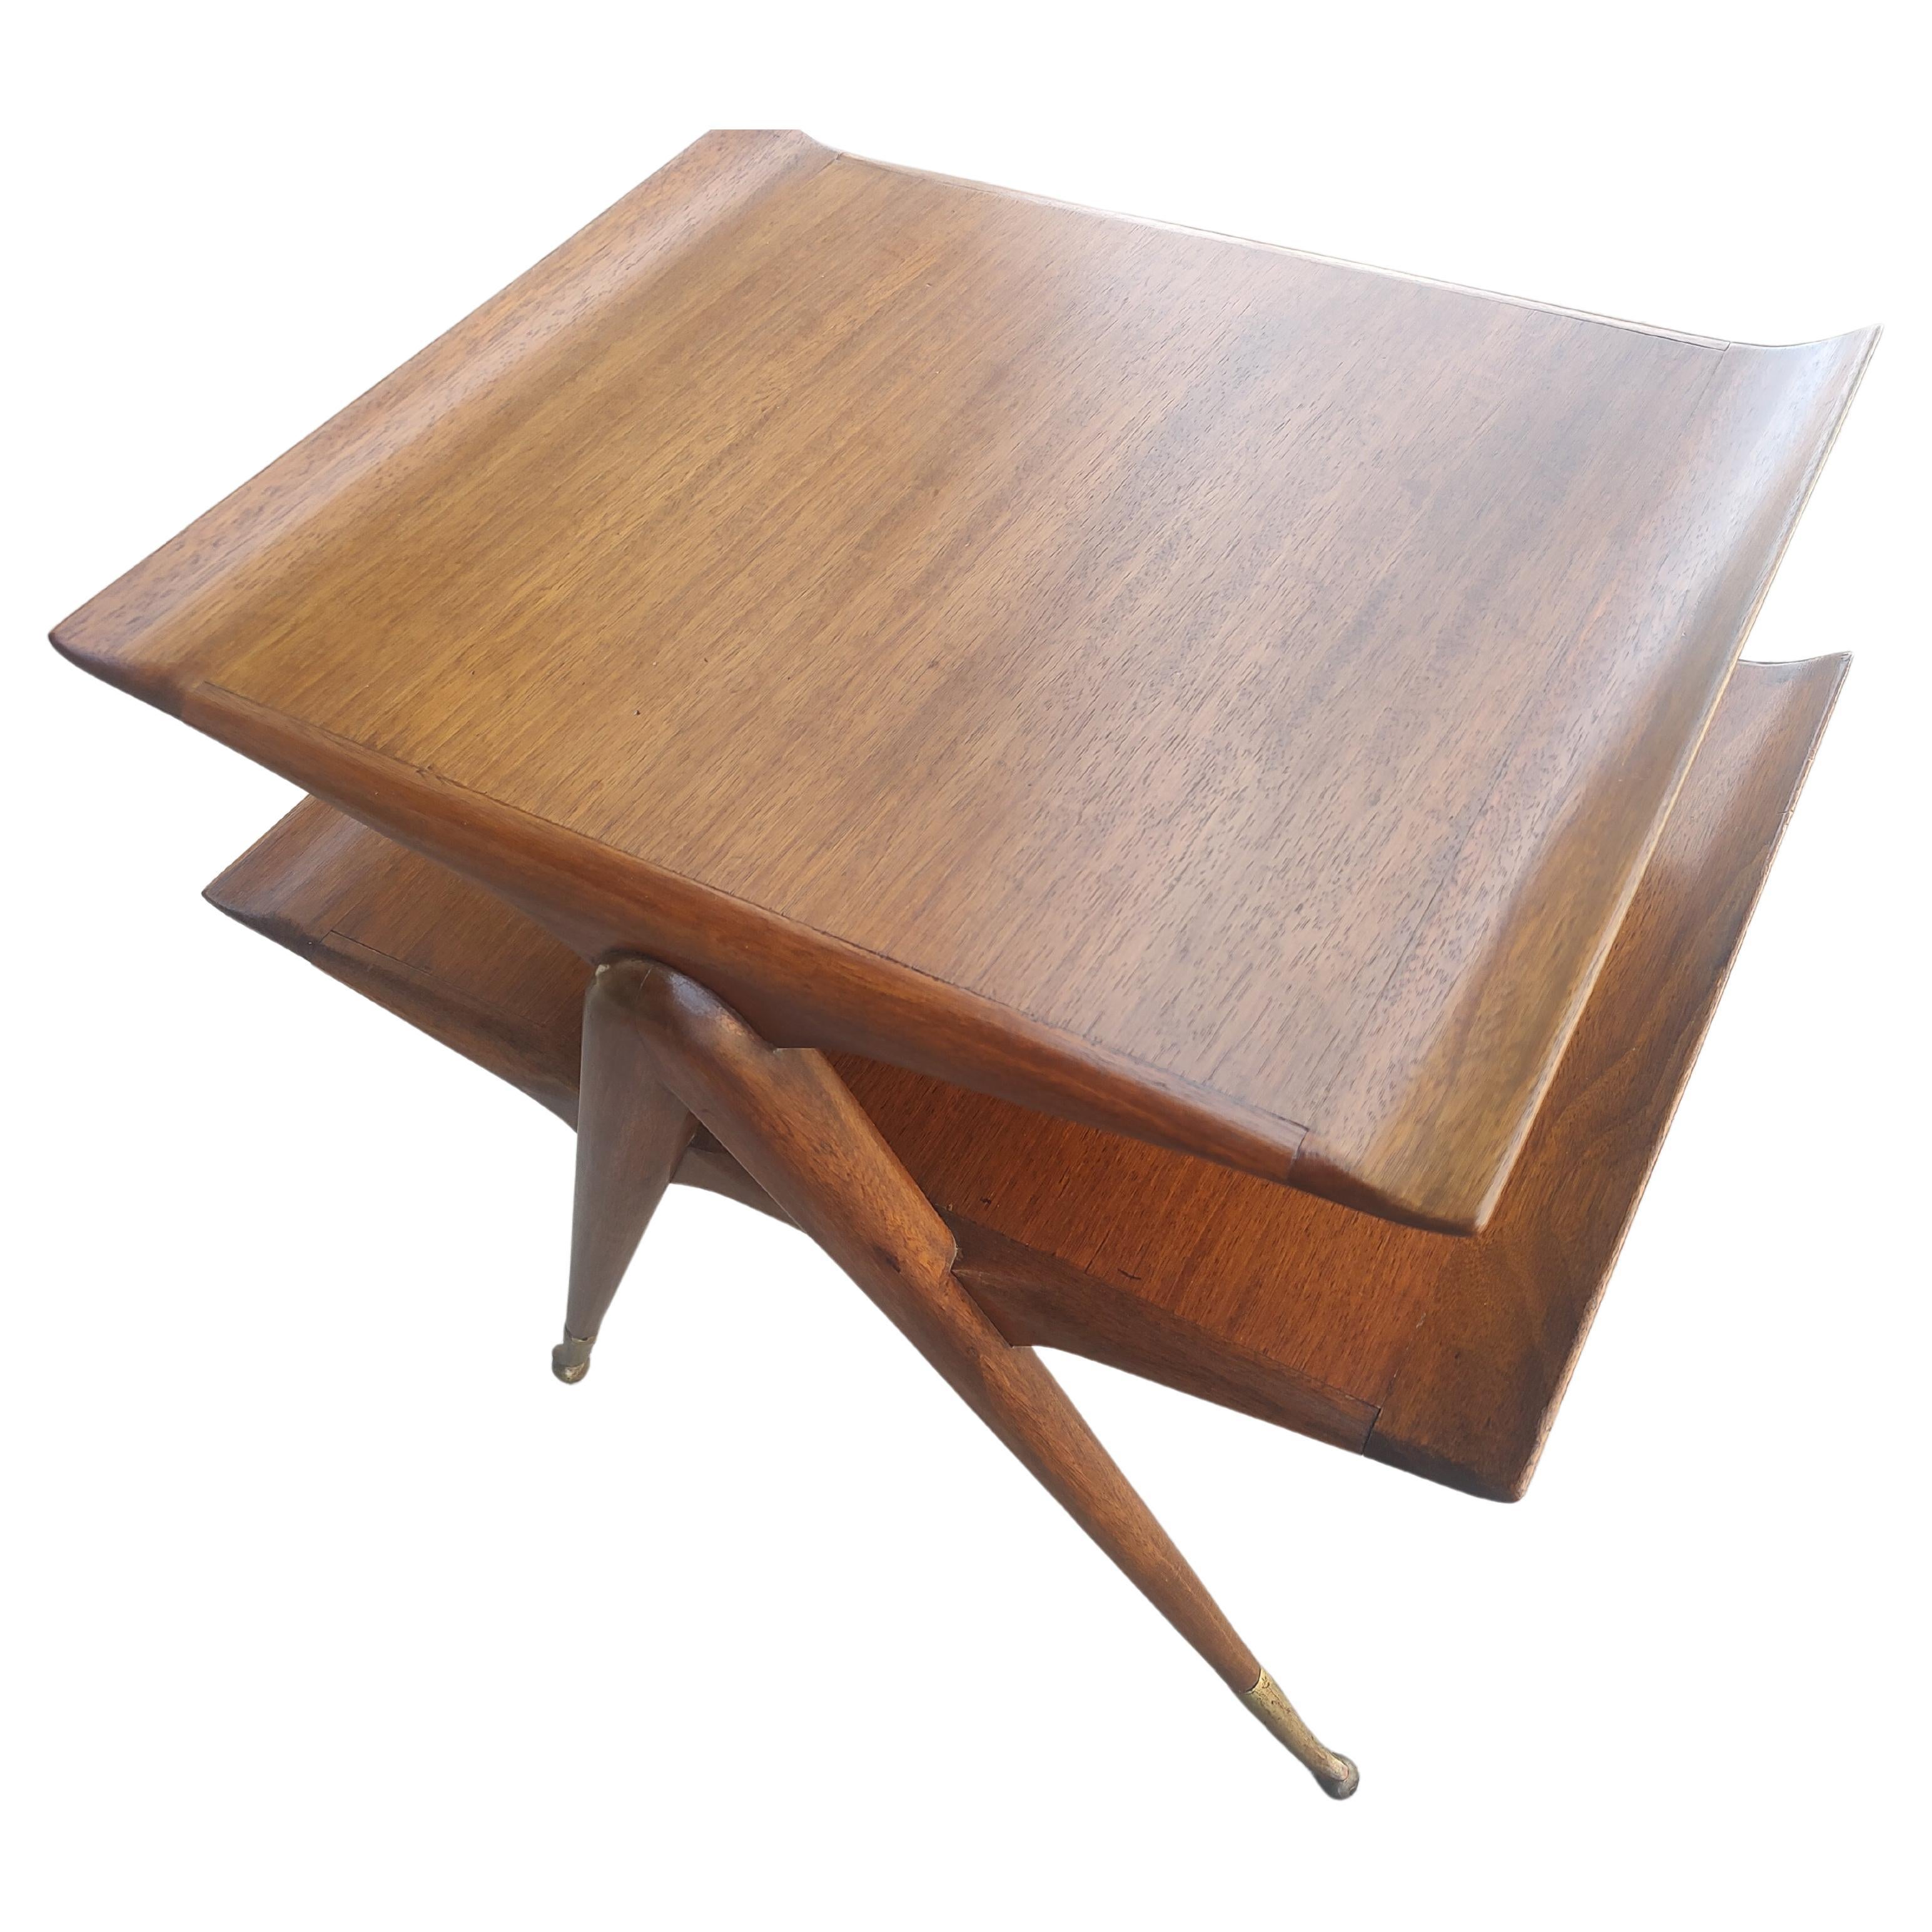 Mid Century Modern End Sofa Walnut Table Attributed to Ico & Luisa Parisi C1955 For Sale 1